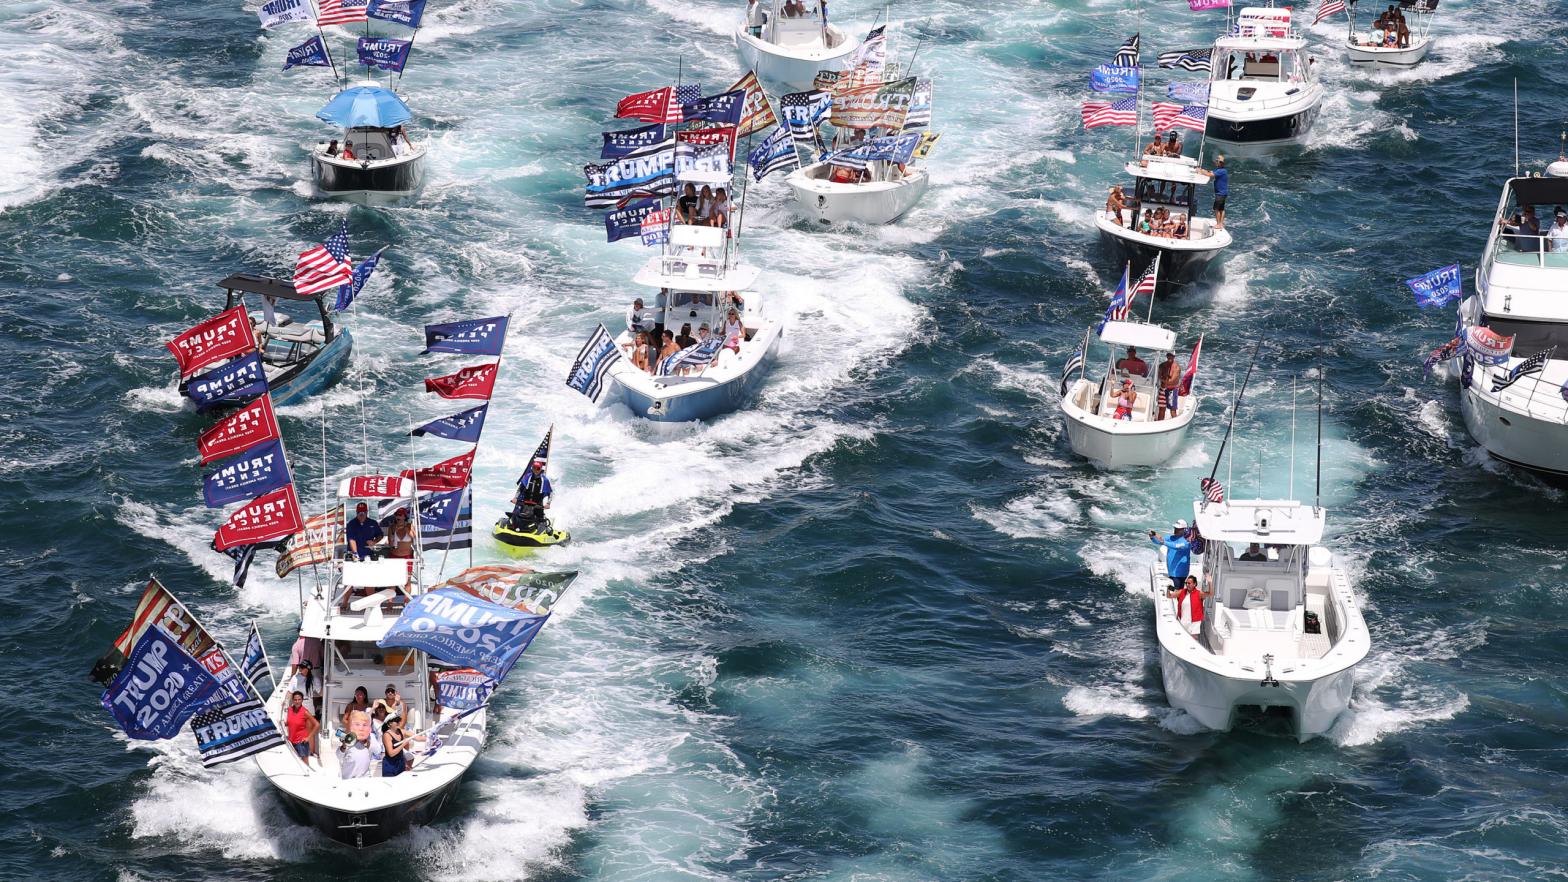 Pro-fascist boaters show their support for President Donald Trump during a parade down the Intracoastal Waterway near Mar-a-Lago on September 7, 2020 in West Palm Beach, Florida. (Photo: Joe Raedle, Getty Images)